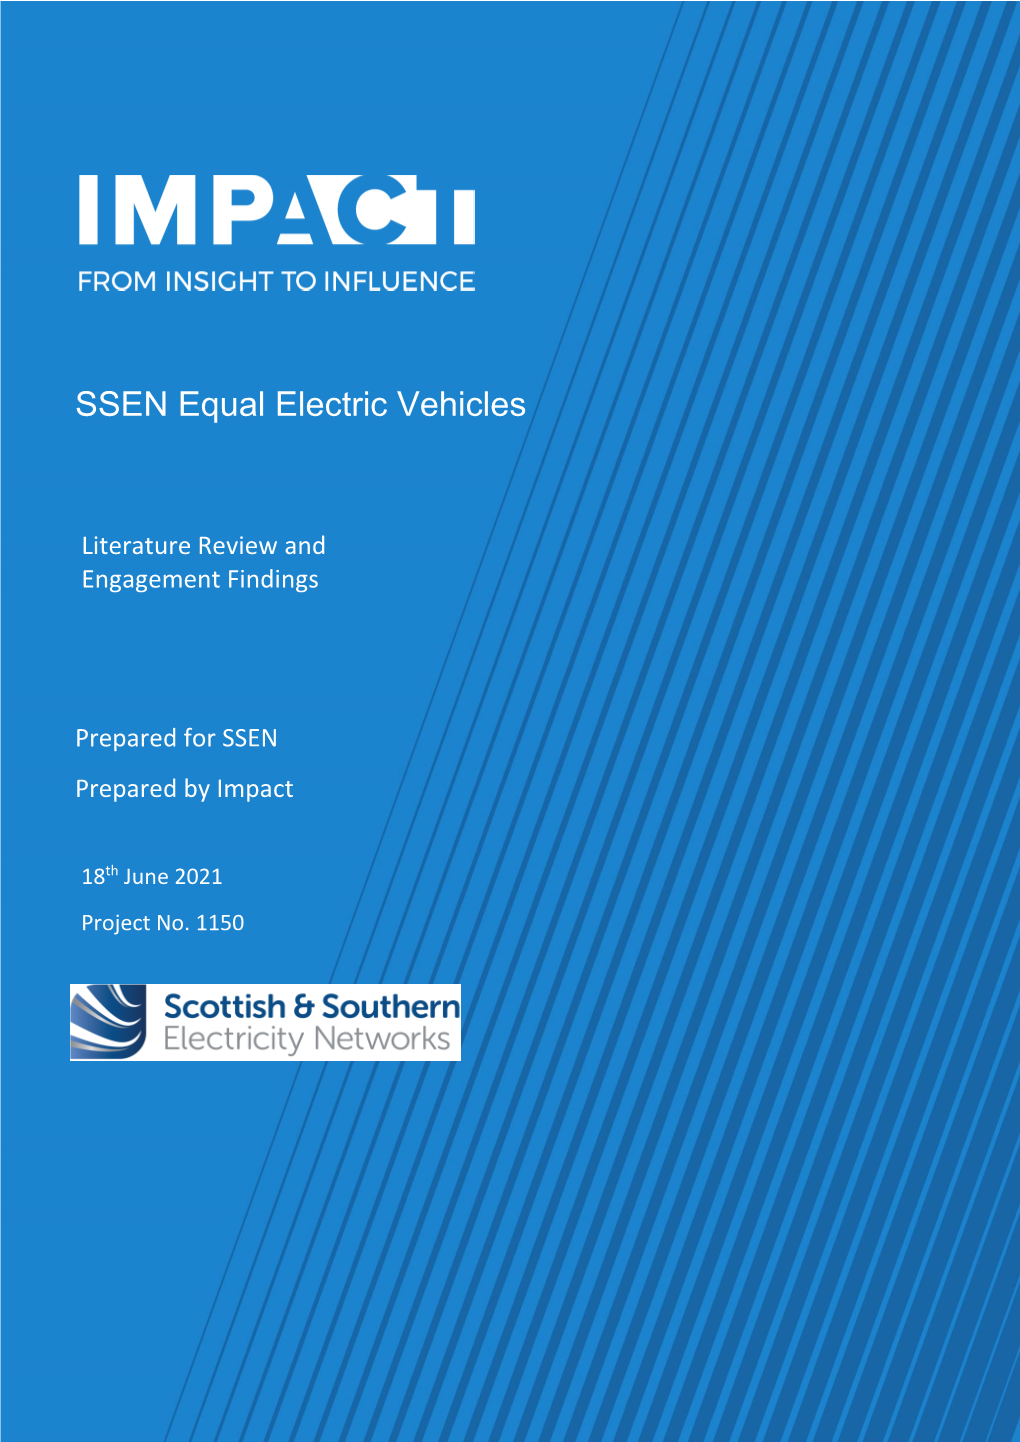 SSEN Equal Electric Vehicles